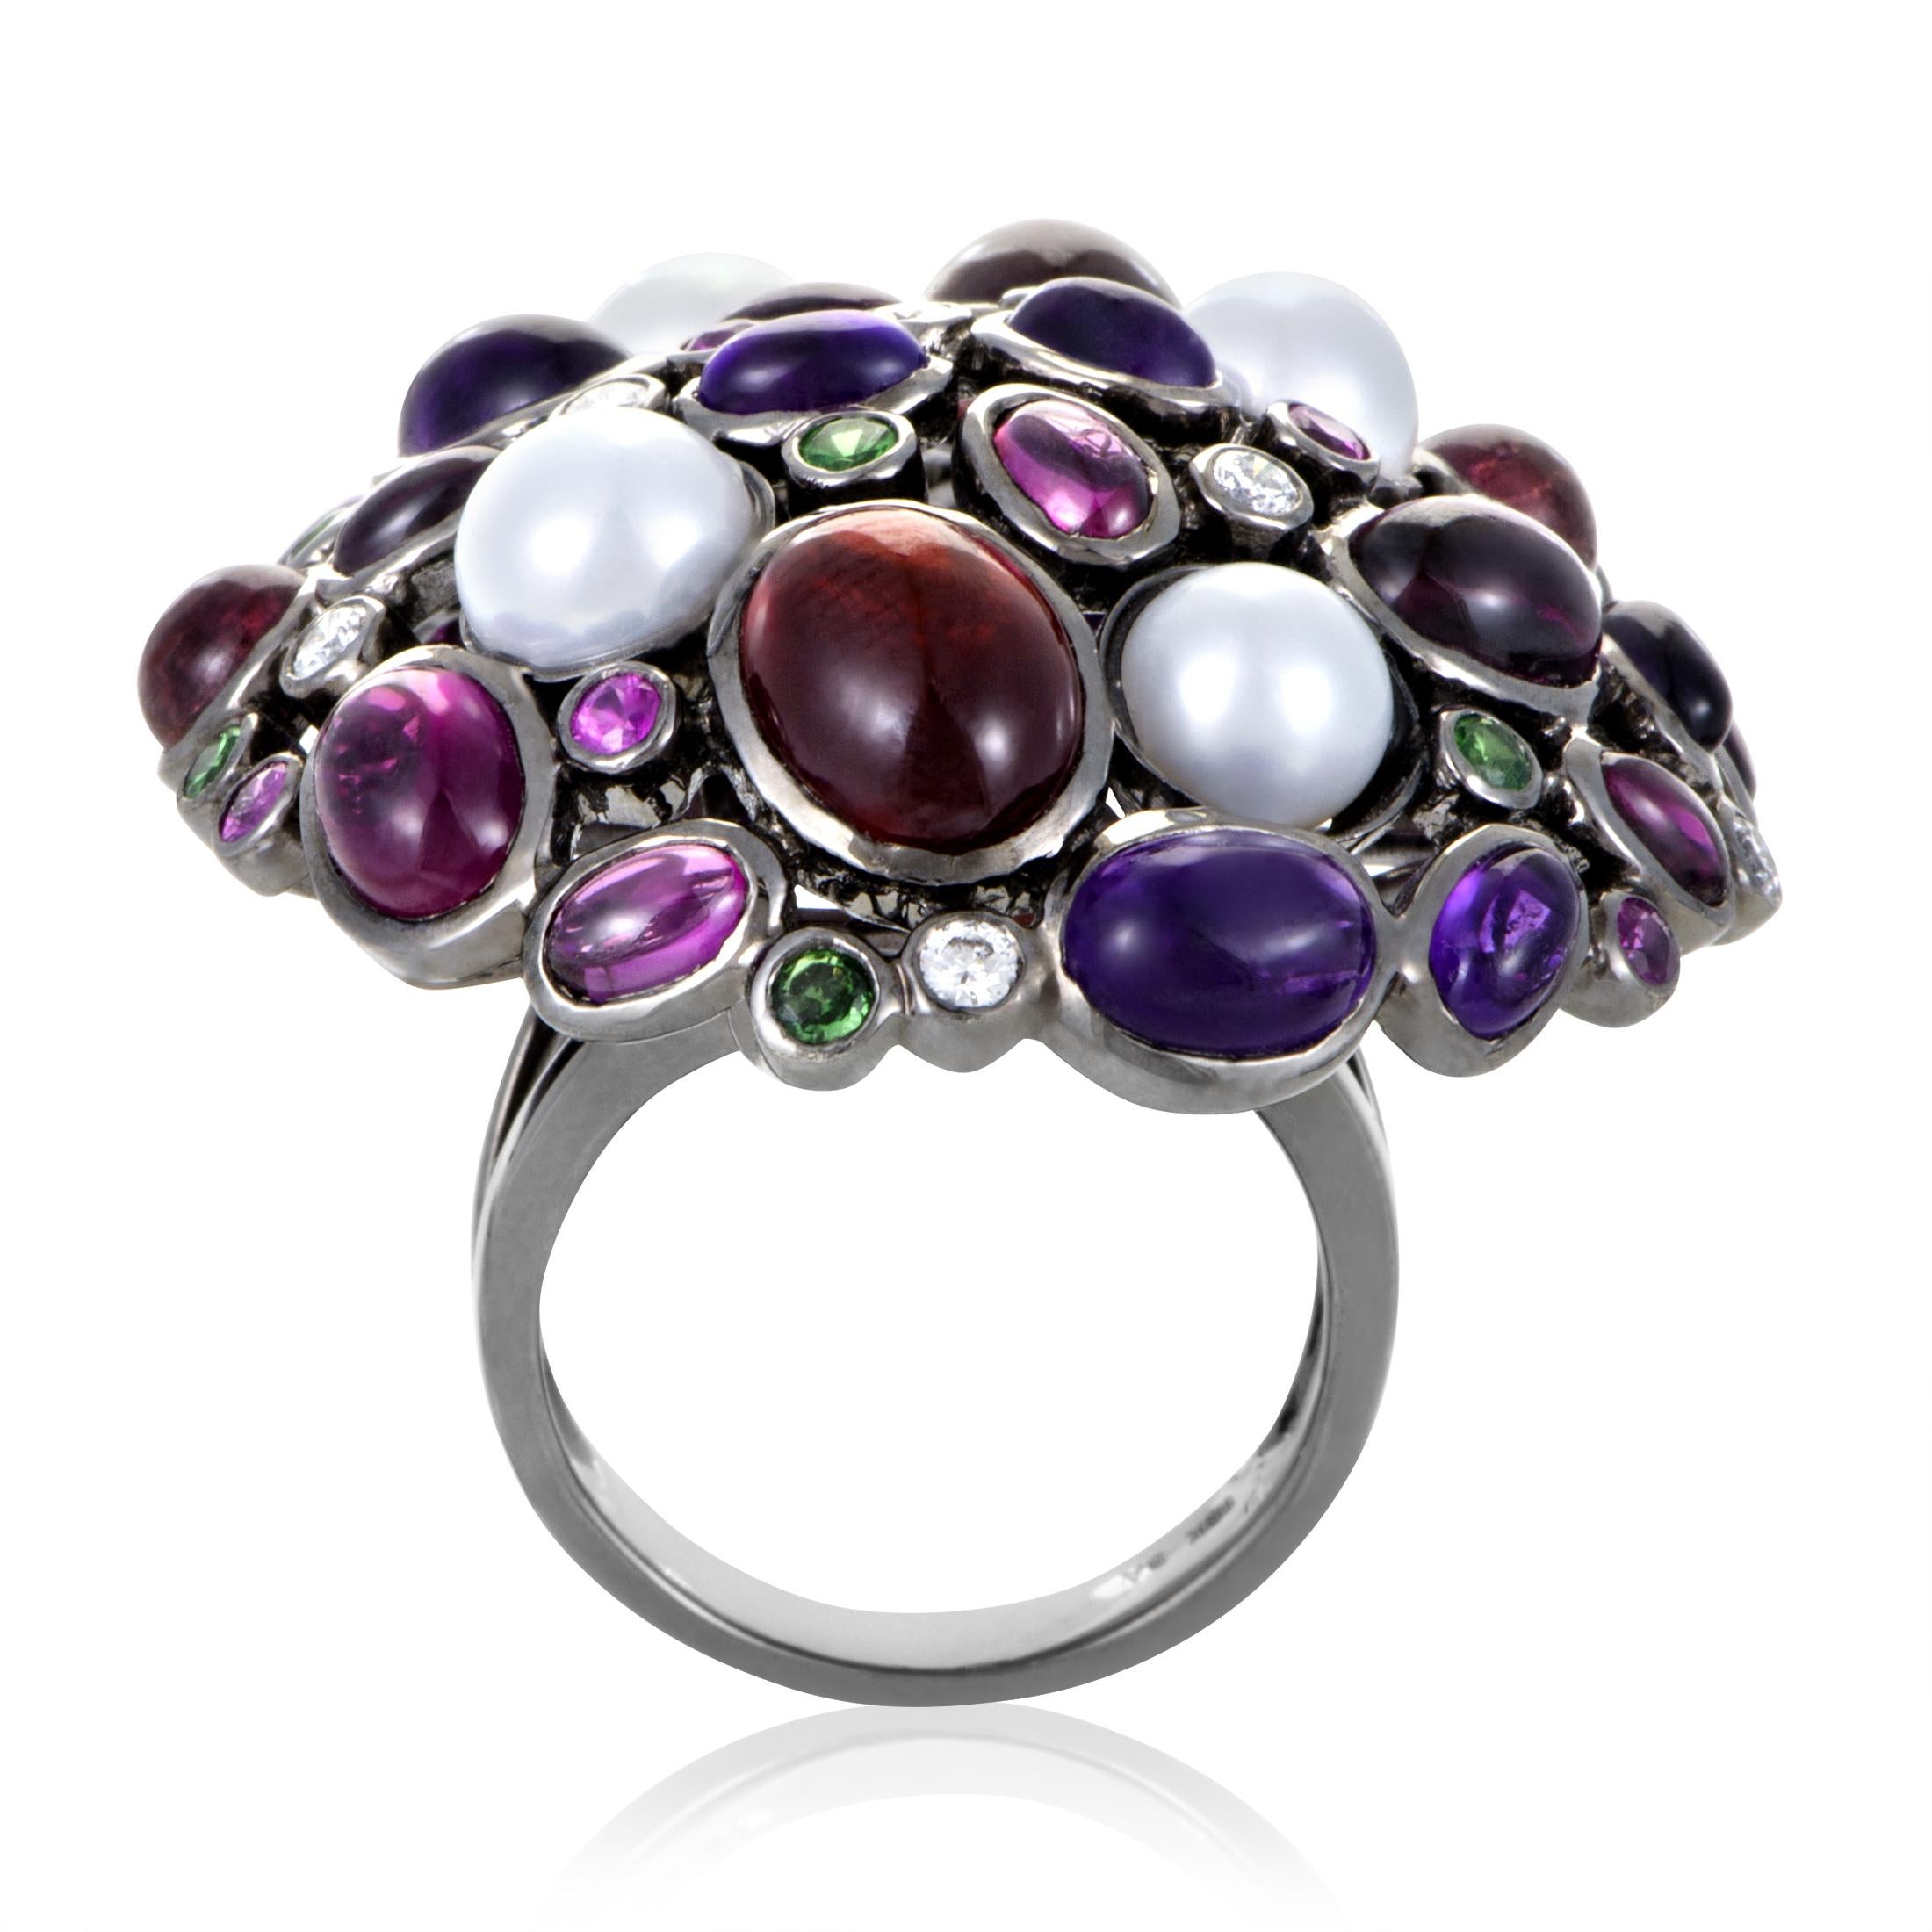 This ring is truly extraordinary with its rhythmic use of gorgeously colored gemstones. The ring is made of 18K white gold and is accented with a crown of gems that vary in size, shape, and color. Absolutely stunning!<br />Ring Top Dimensions: 35 x